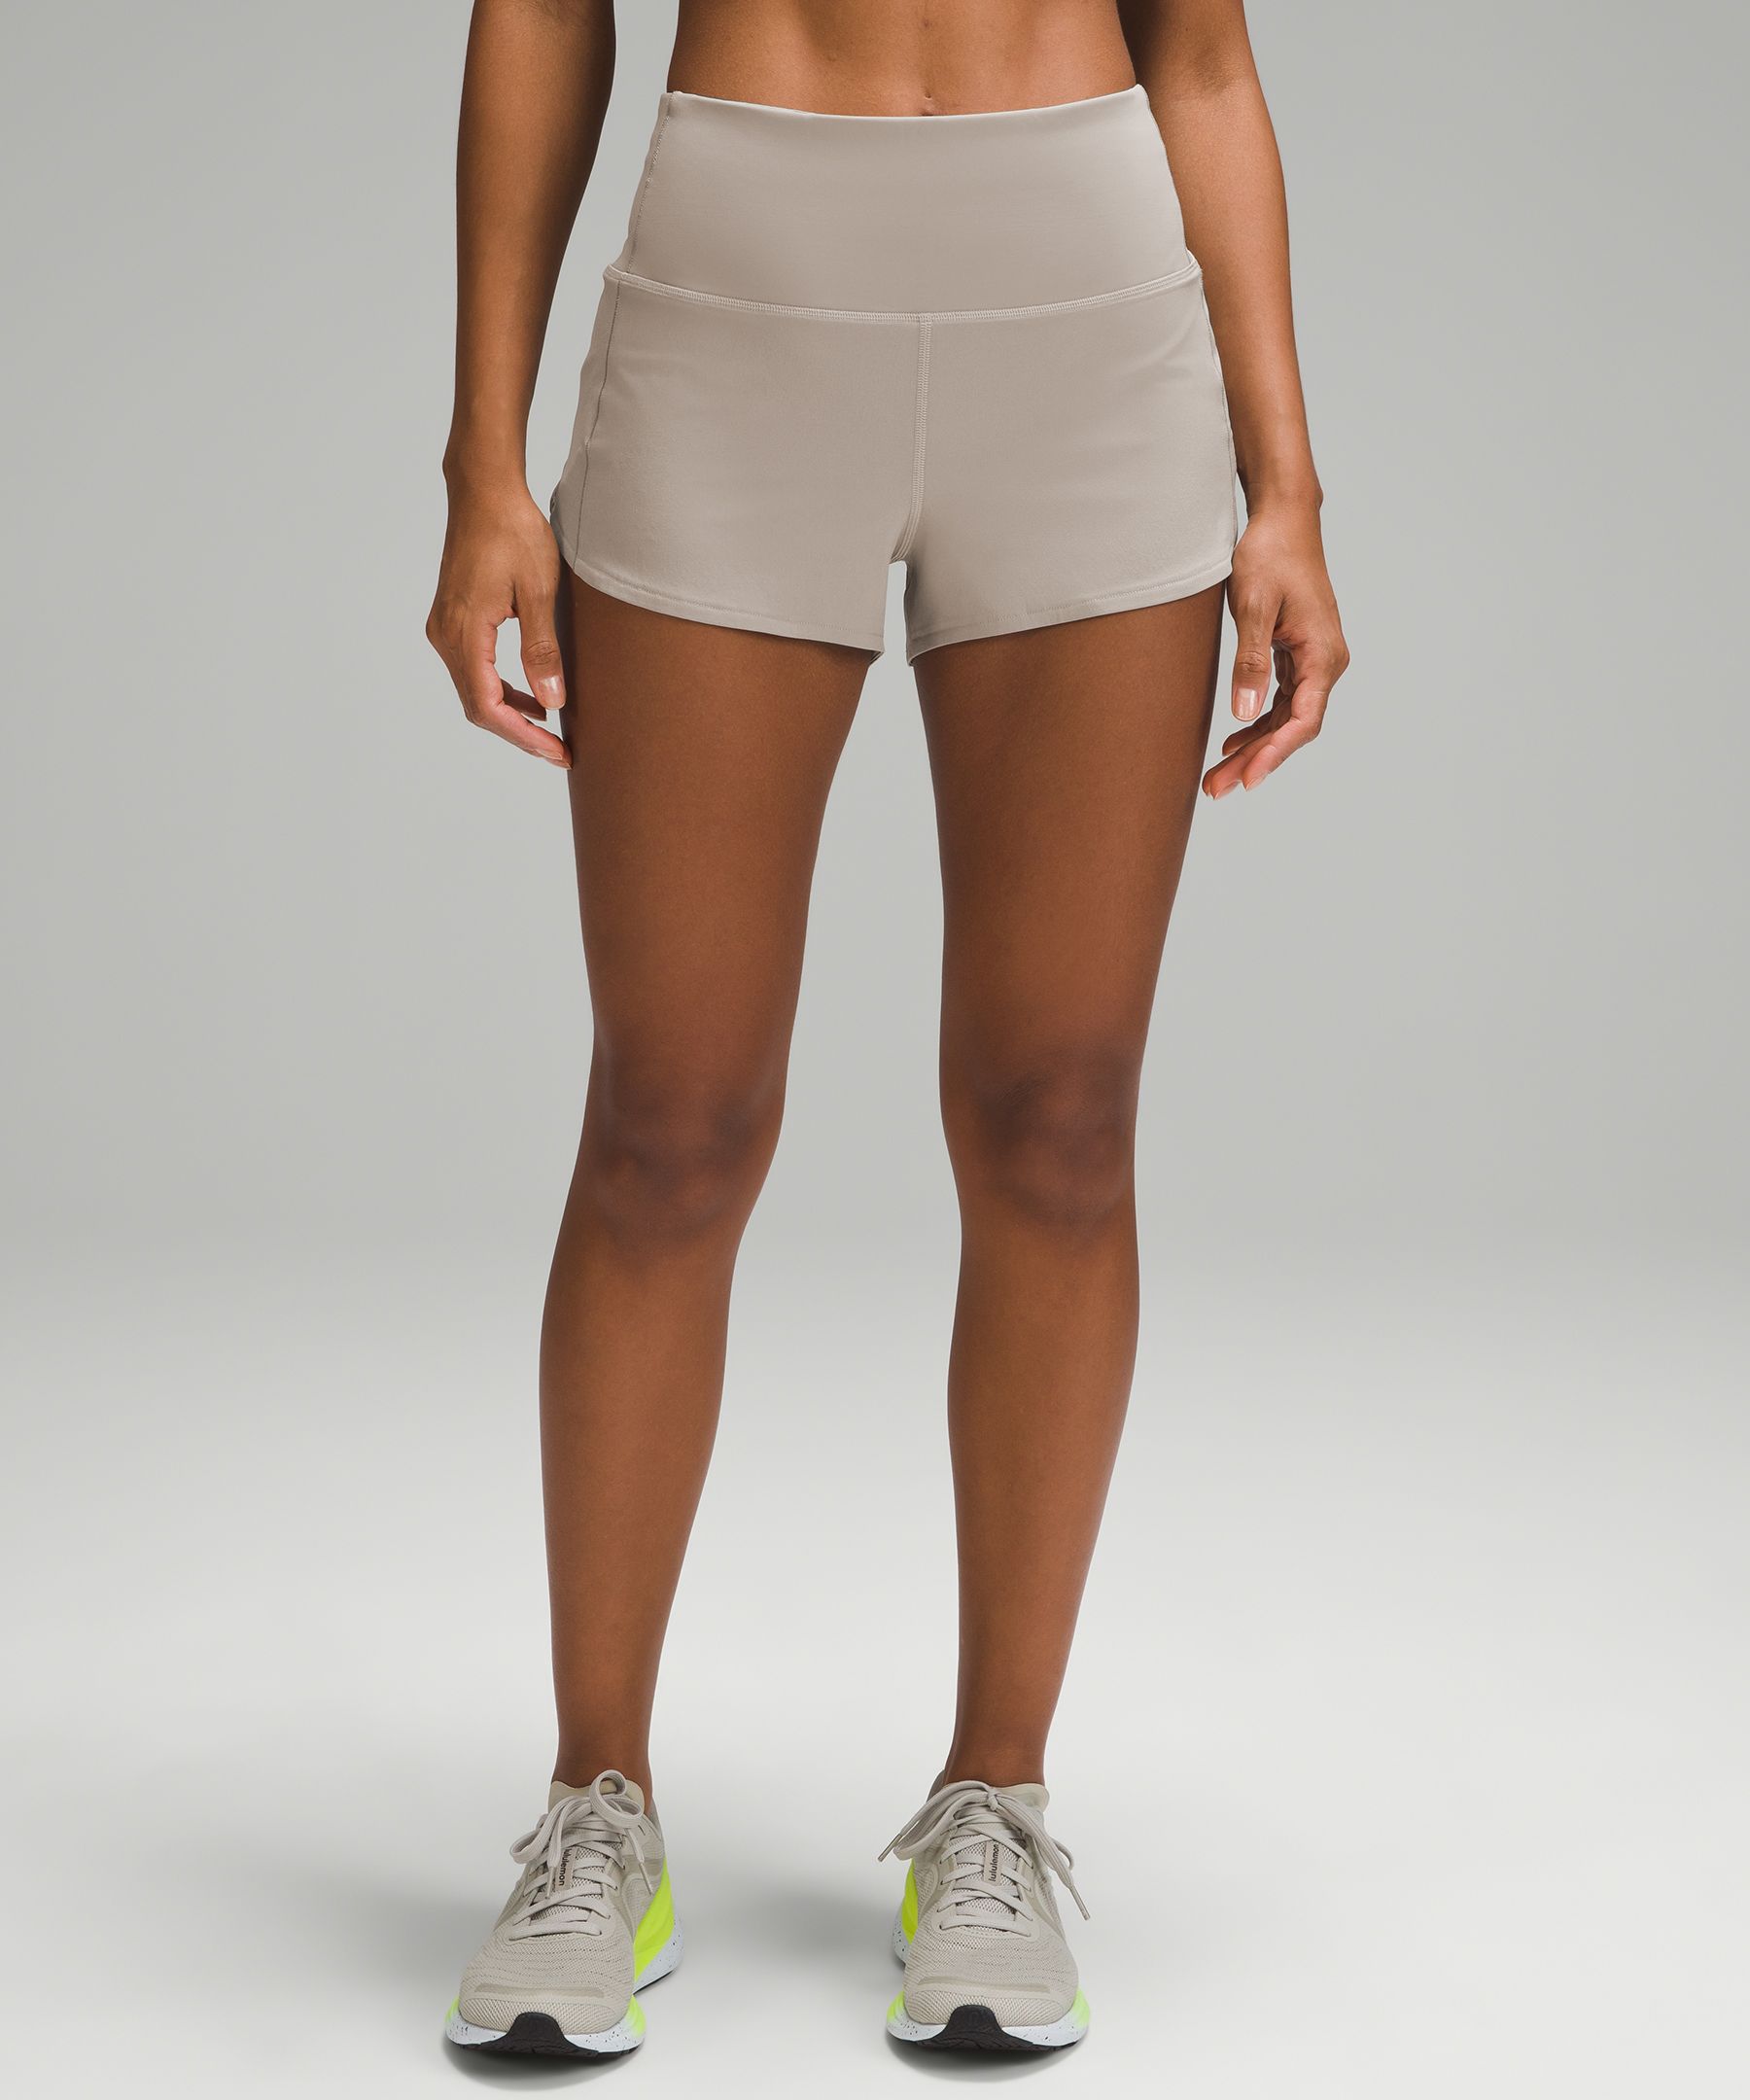 Speed Up High-Rise Lined Short 2.5, Women's Shorts